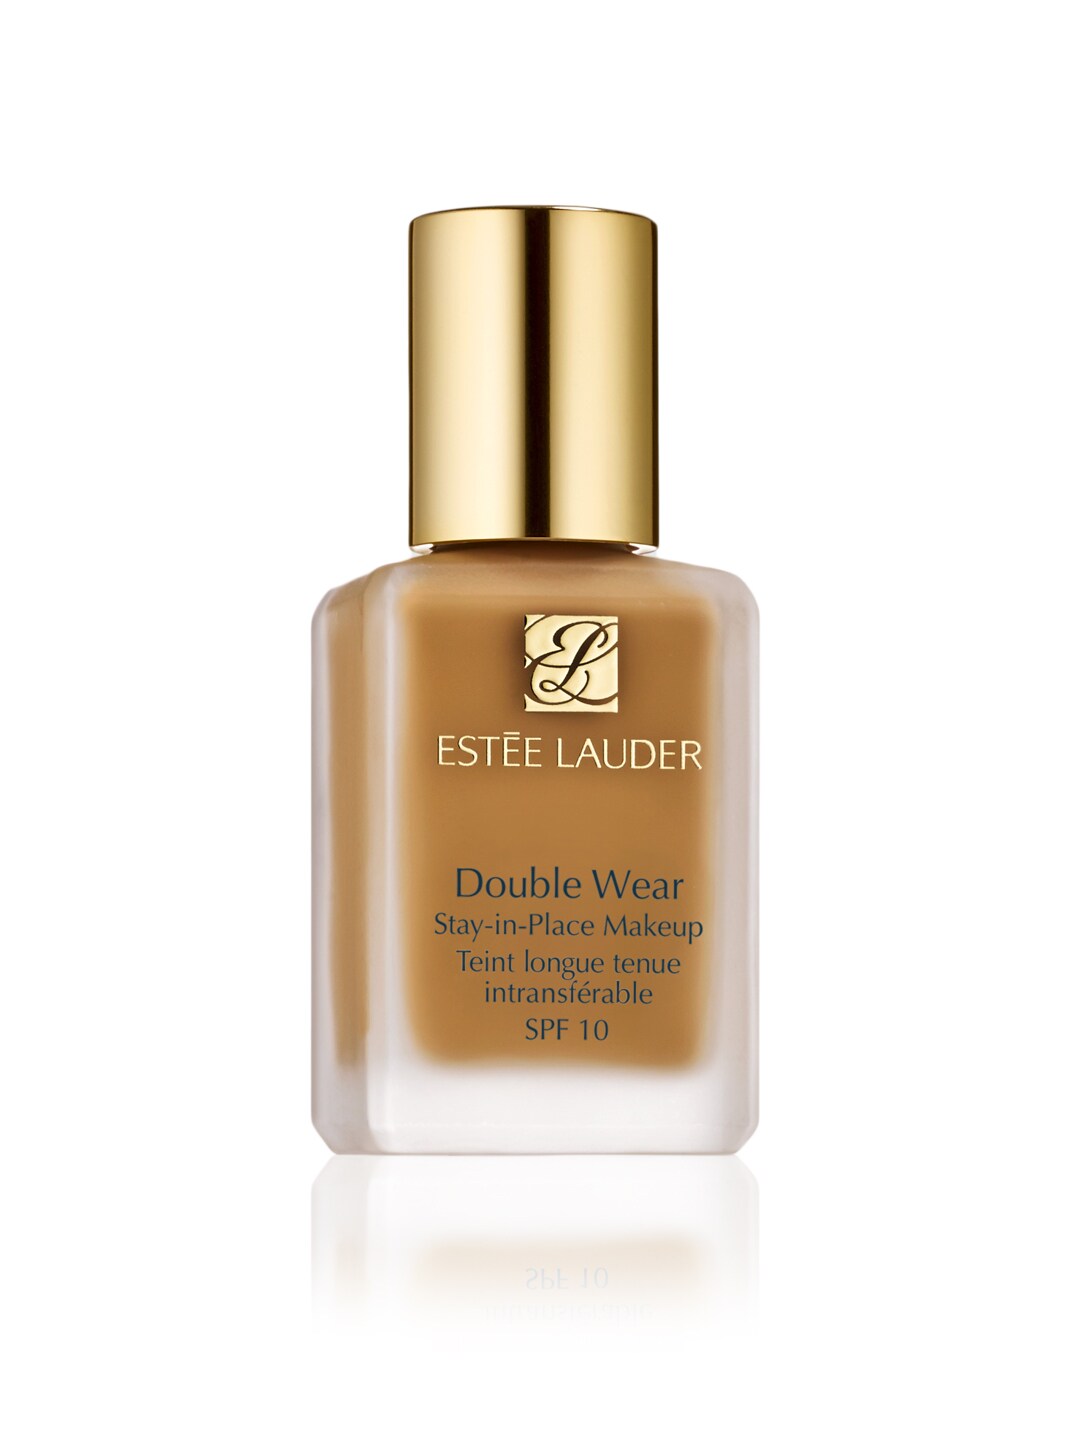 Estee Lauder Double Wear Stay-in-Place SPF 10 Makeup Liquid Foundation 30ml Price in India